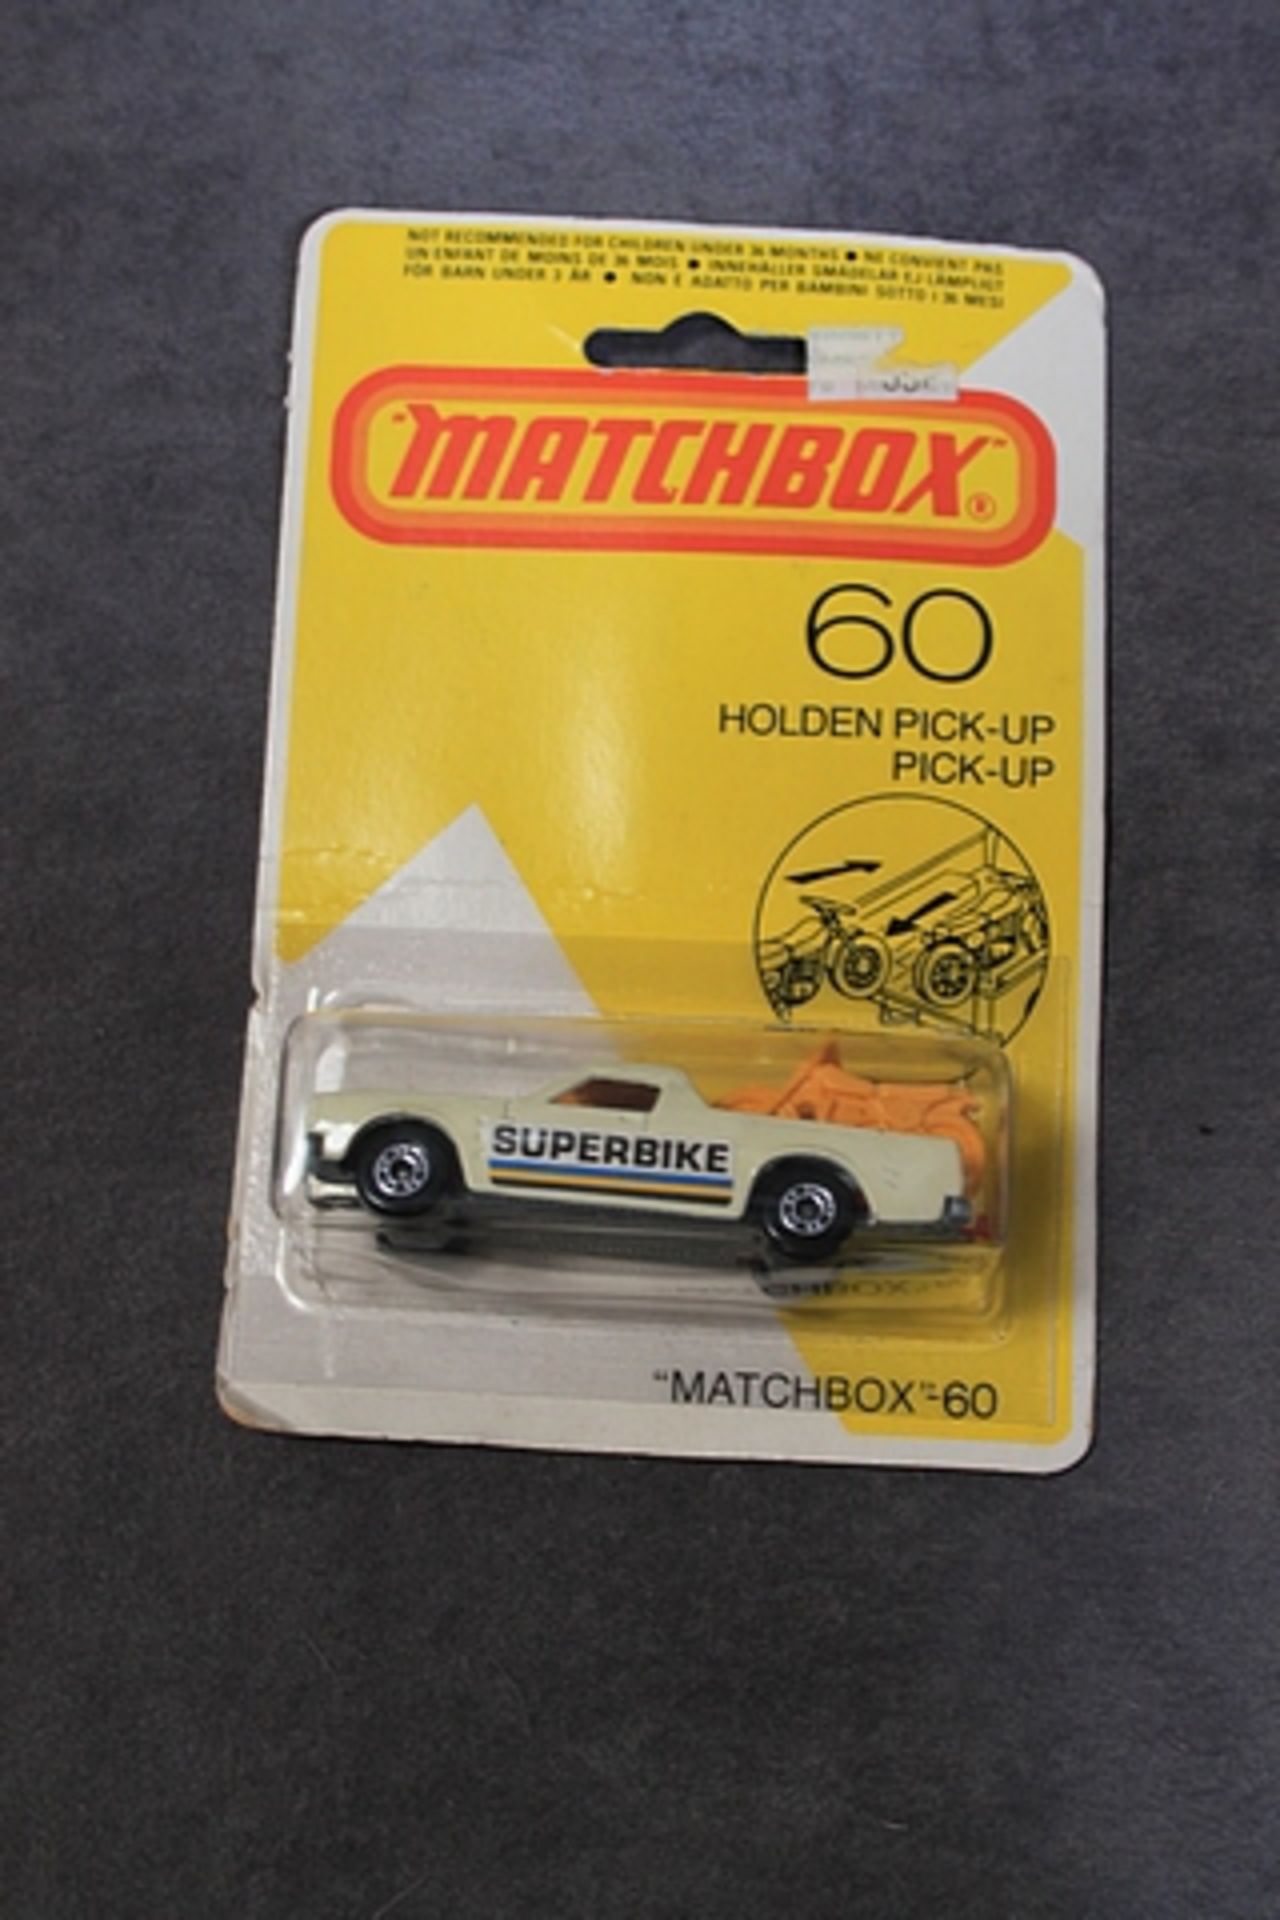 Matchbox Diecast #60 Holden Pick Up Cream Body Superbike Decal With Yellow Bikes Mint On Card - Image 2 of 2